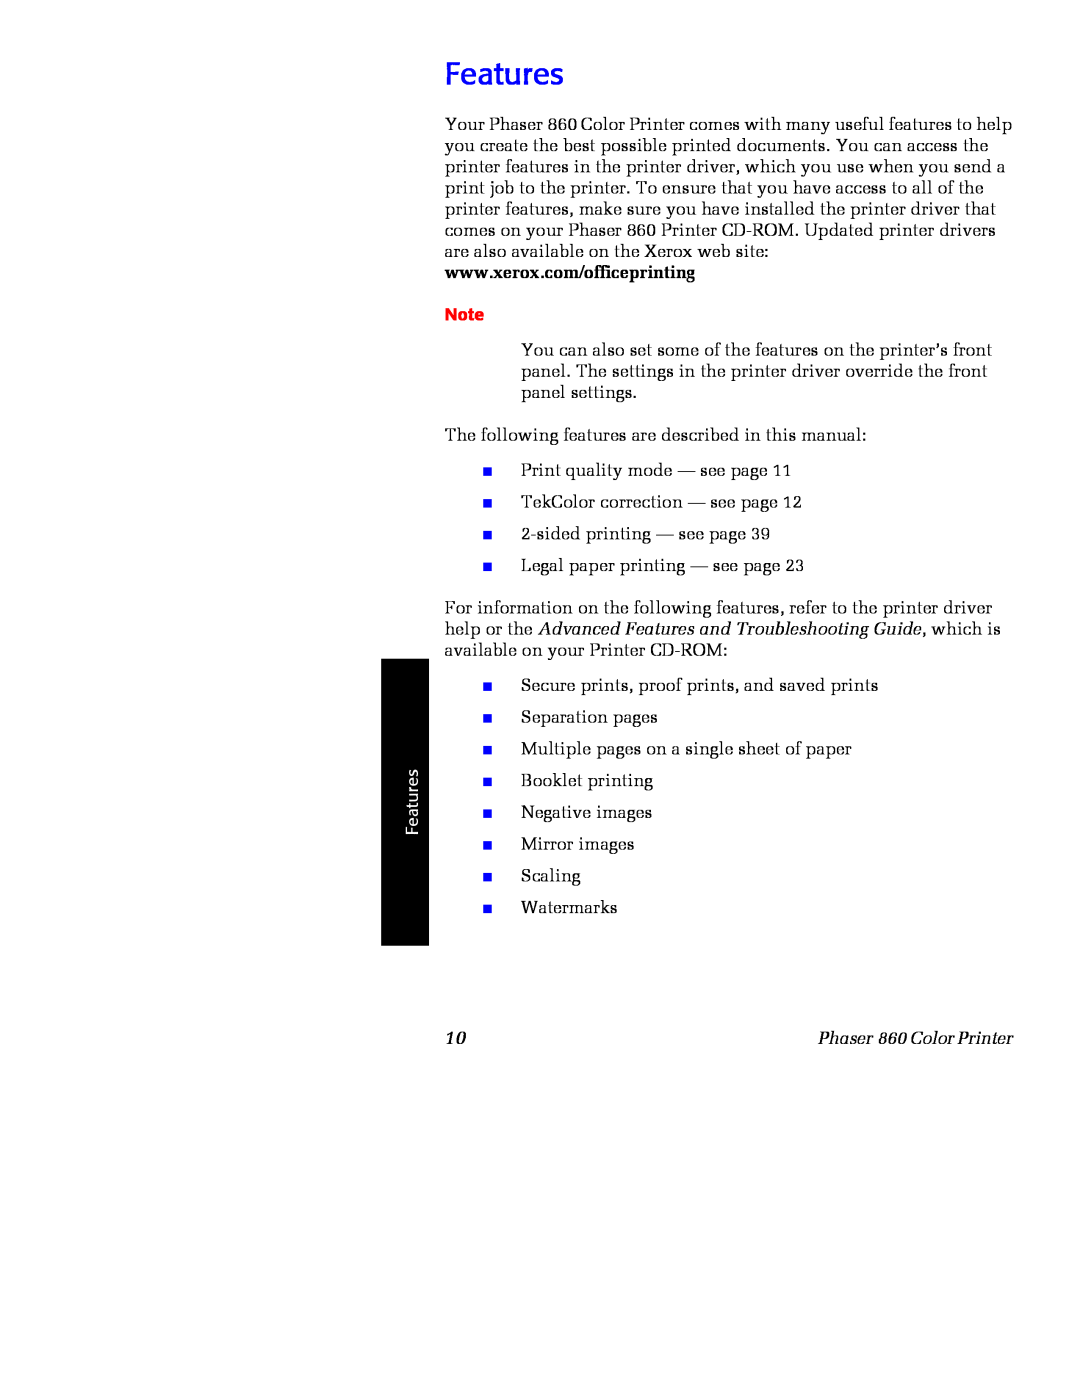 Xerox manual Features, Phaser 860 Color Printer 